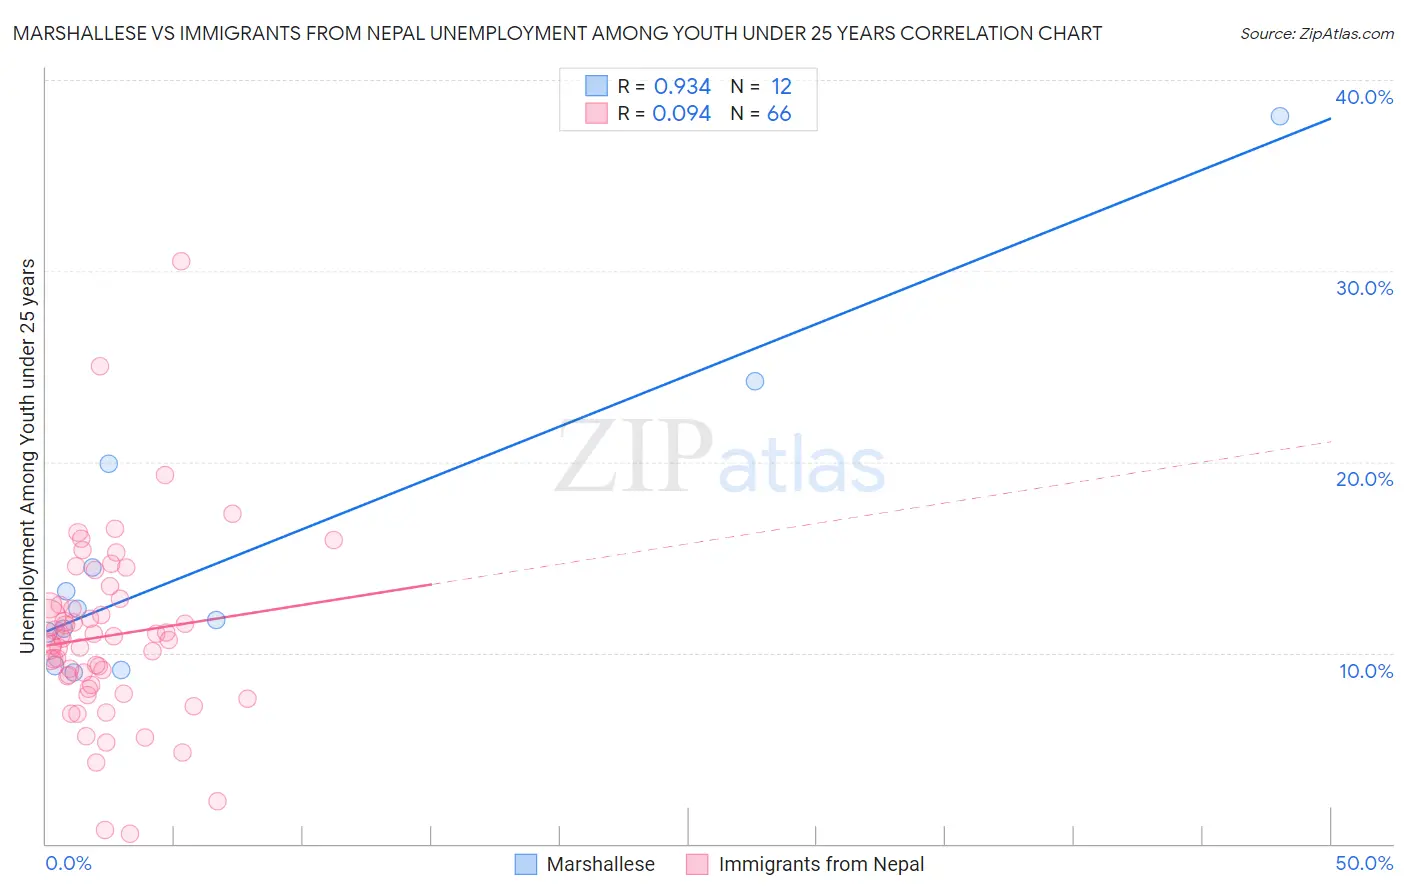 Marshallese vs Immigrants from Nepal Unemployment Among Youth under 25 years